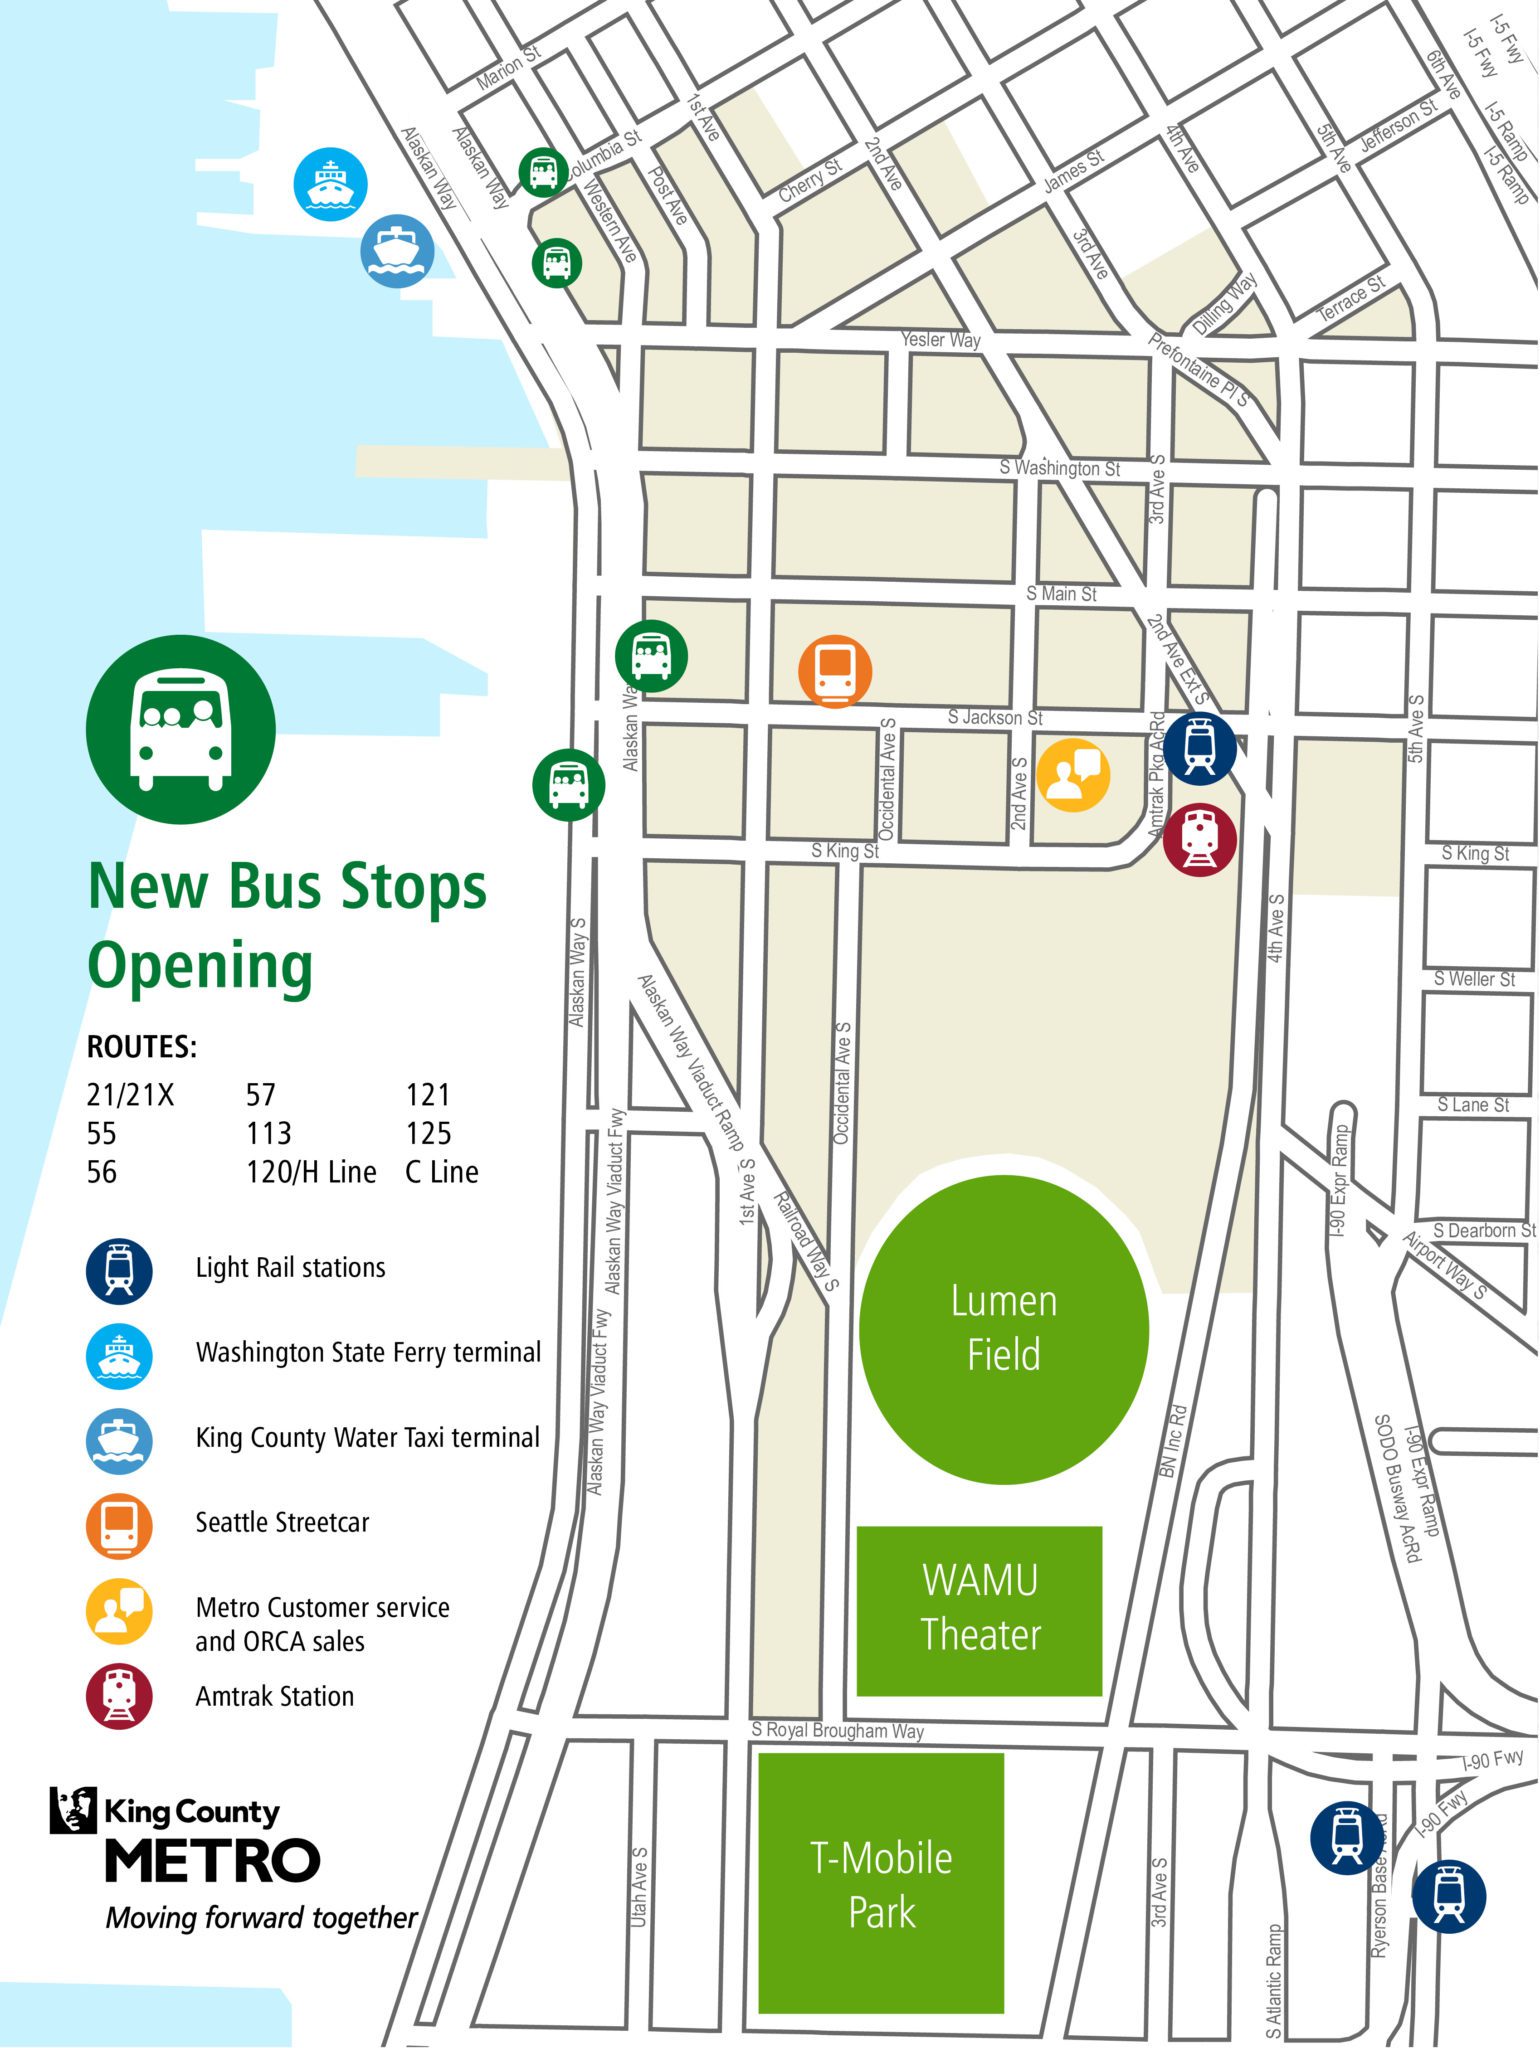 Map of new bus stops along Alaskan Way S, near S Jackson St, along Seattle’s waterfront. The two new bus stops’ locations can be seen in the large green circular bus icons.